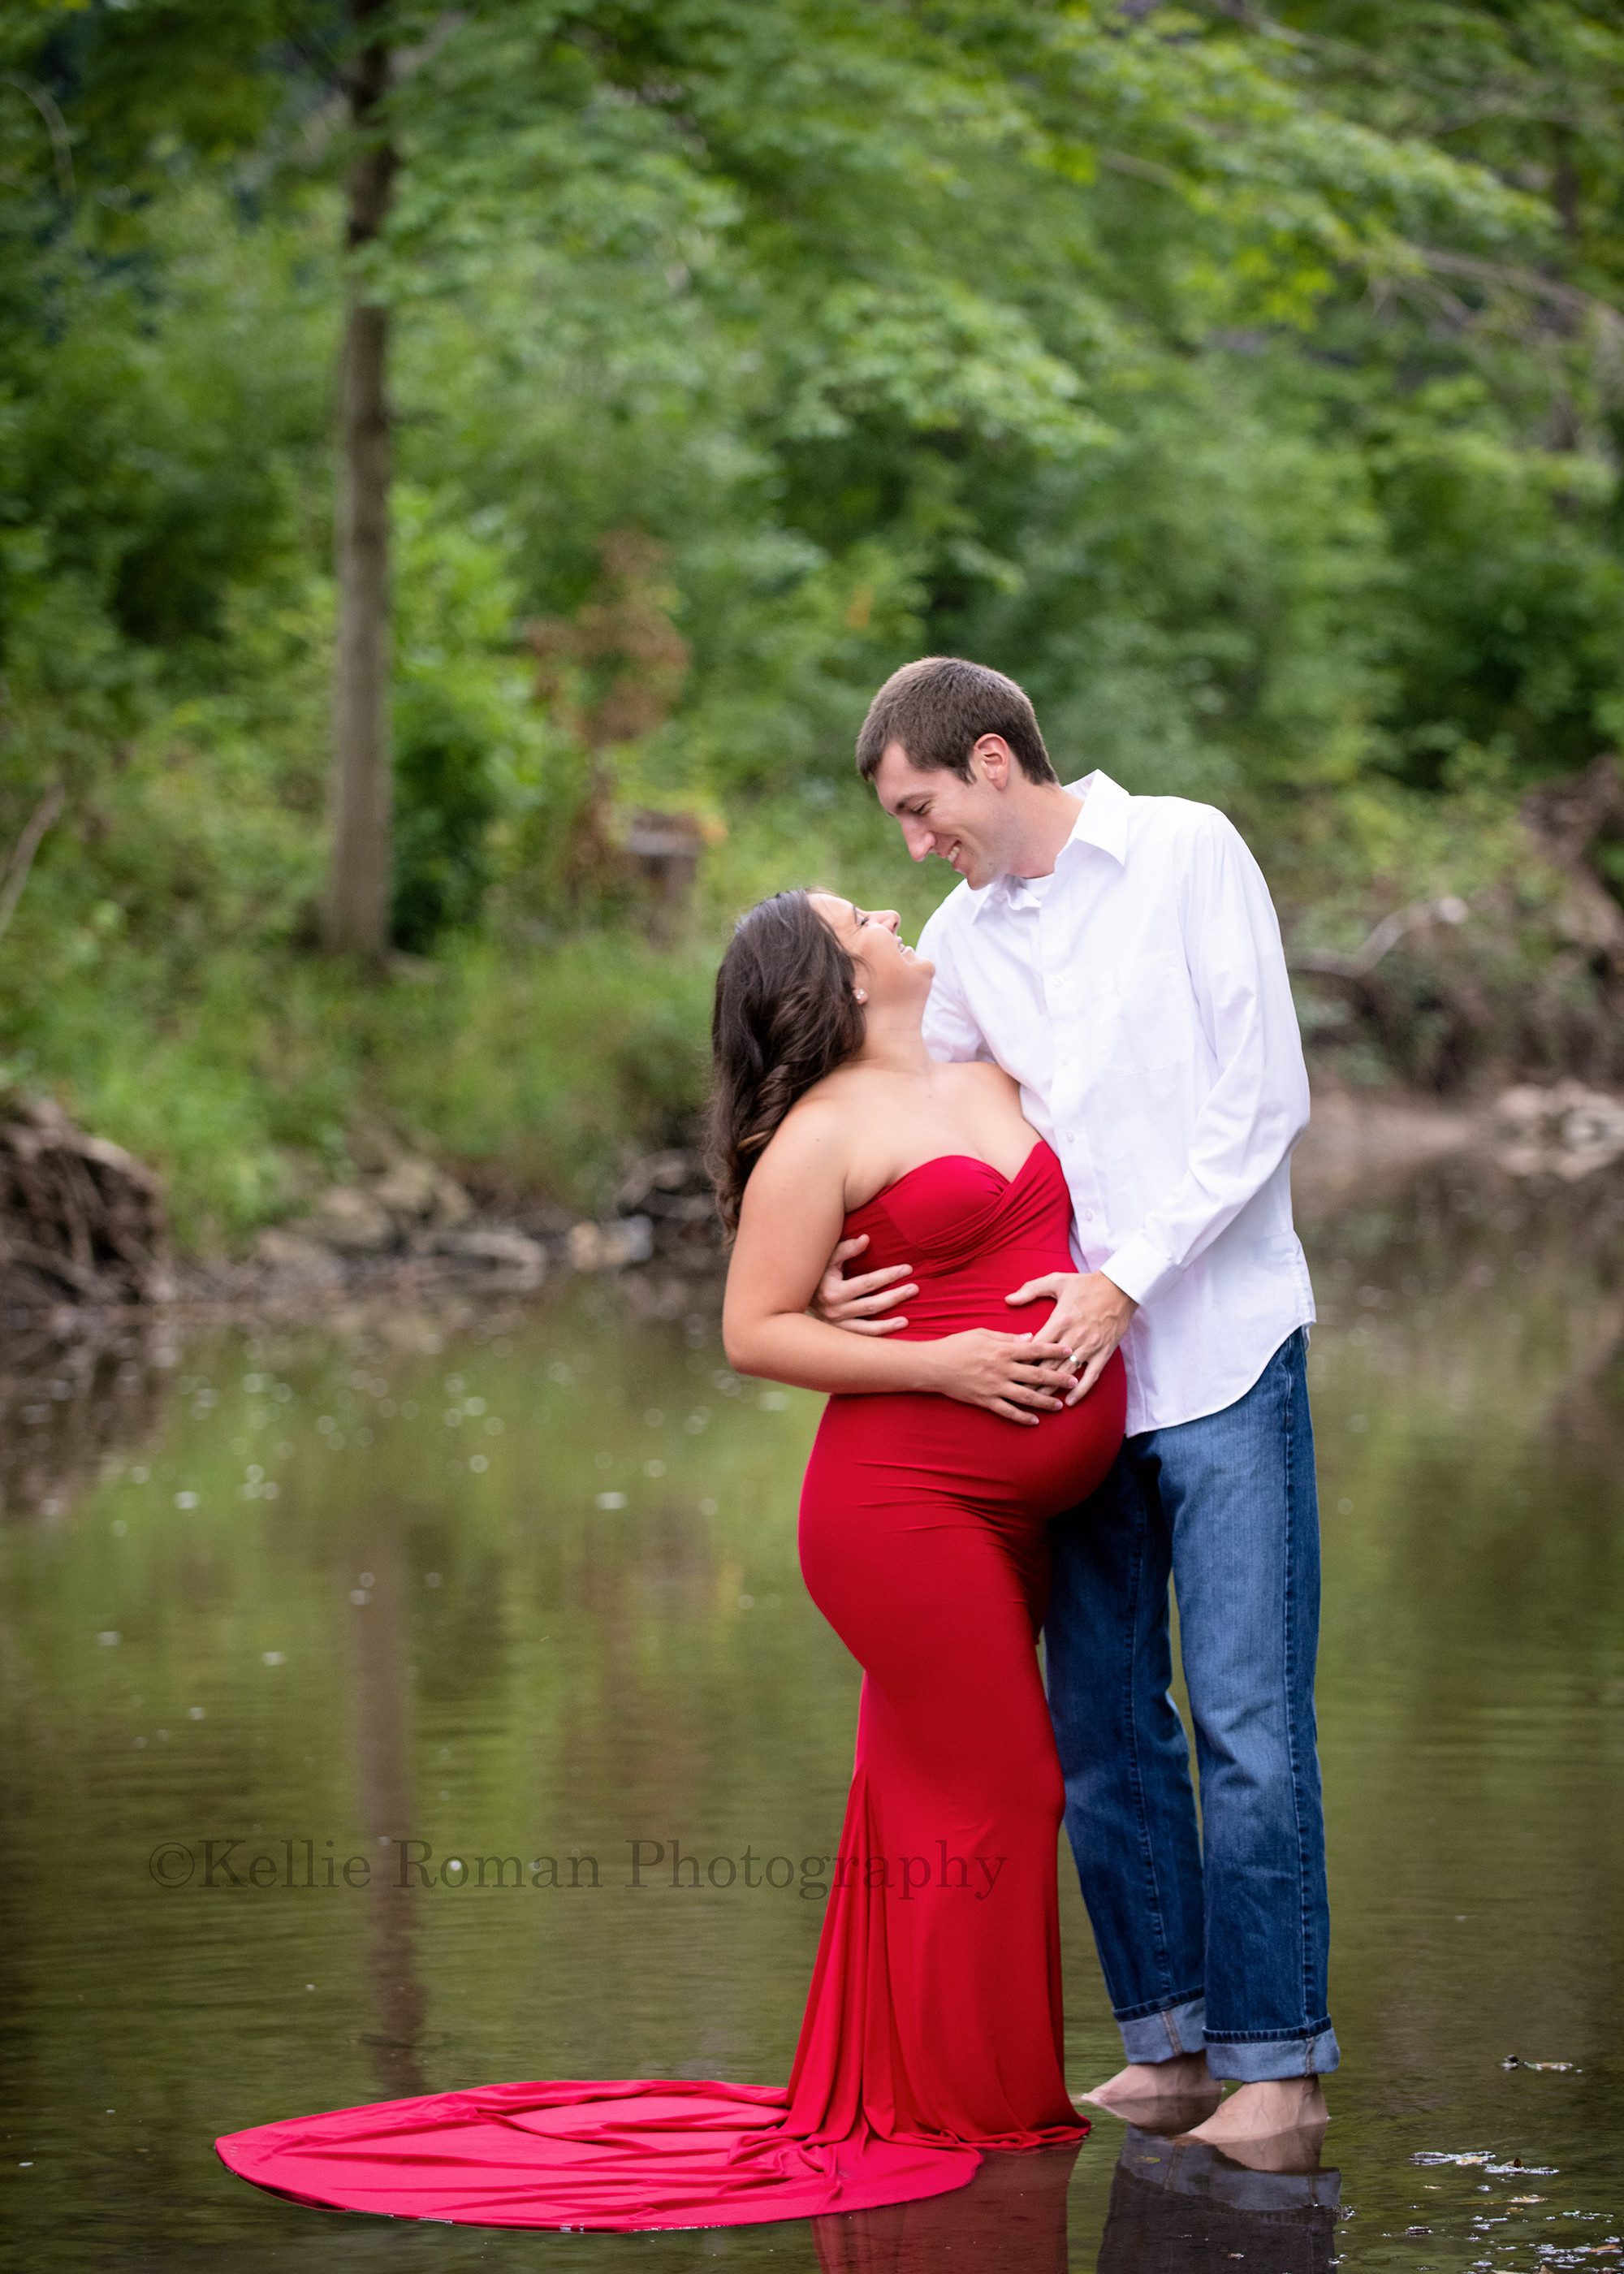 maternity gowns a husband and wife standing in a river in kenosha Wisconsin the women is pregnant and wearing a tight red gown her husband has on jeans and a white shirt they are looking at each other and smiling